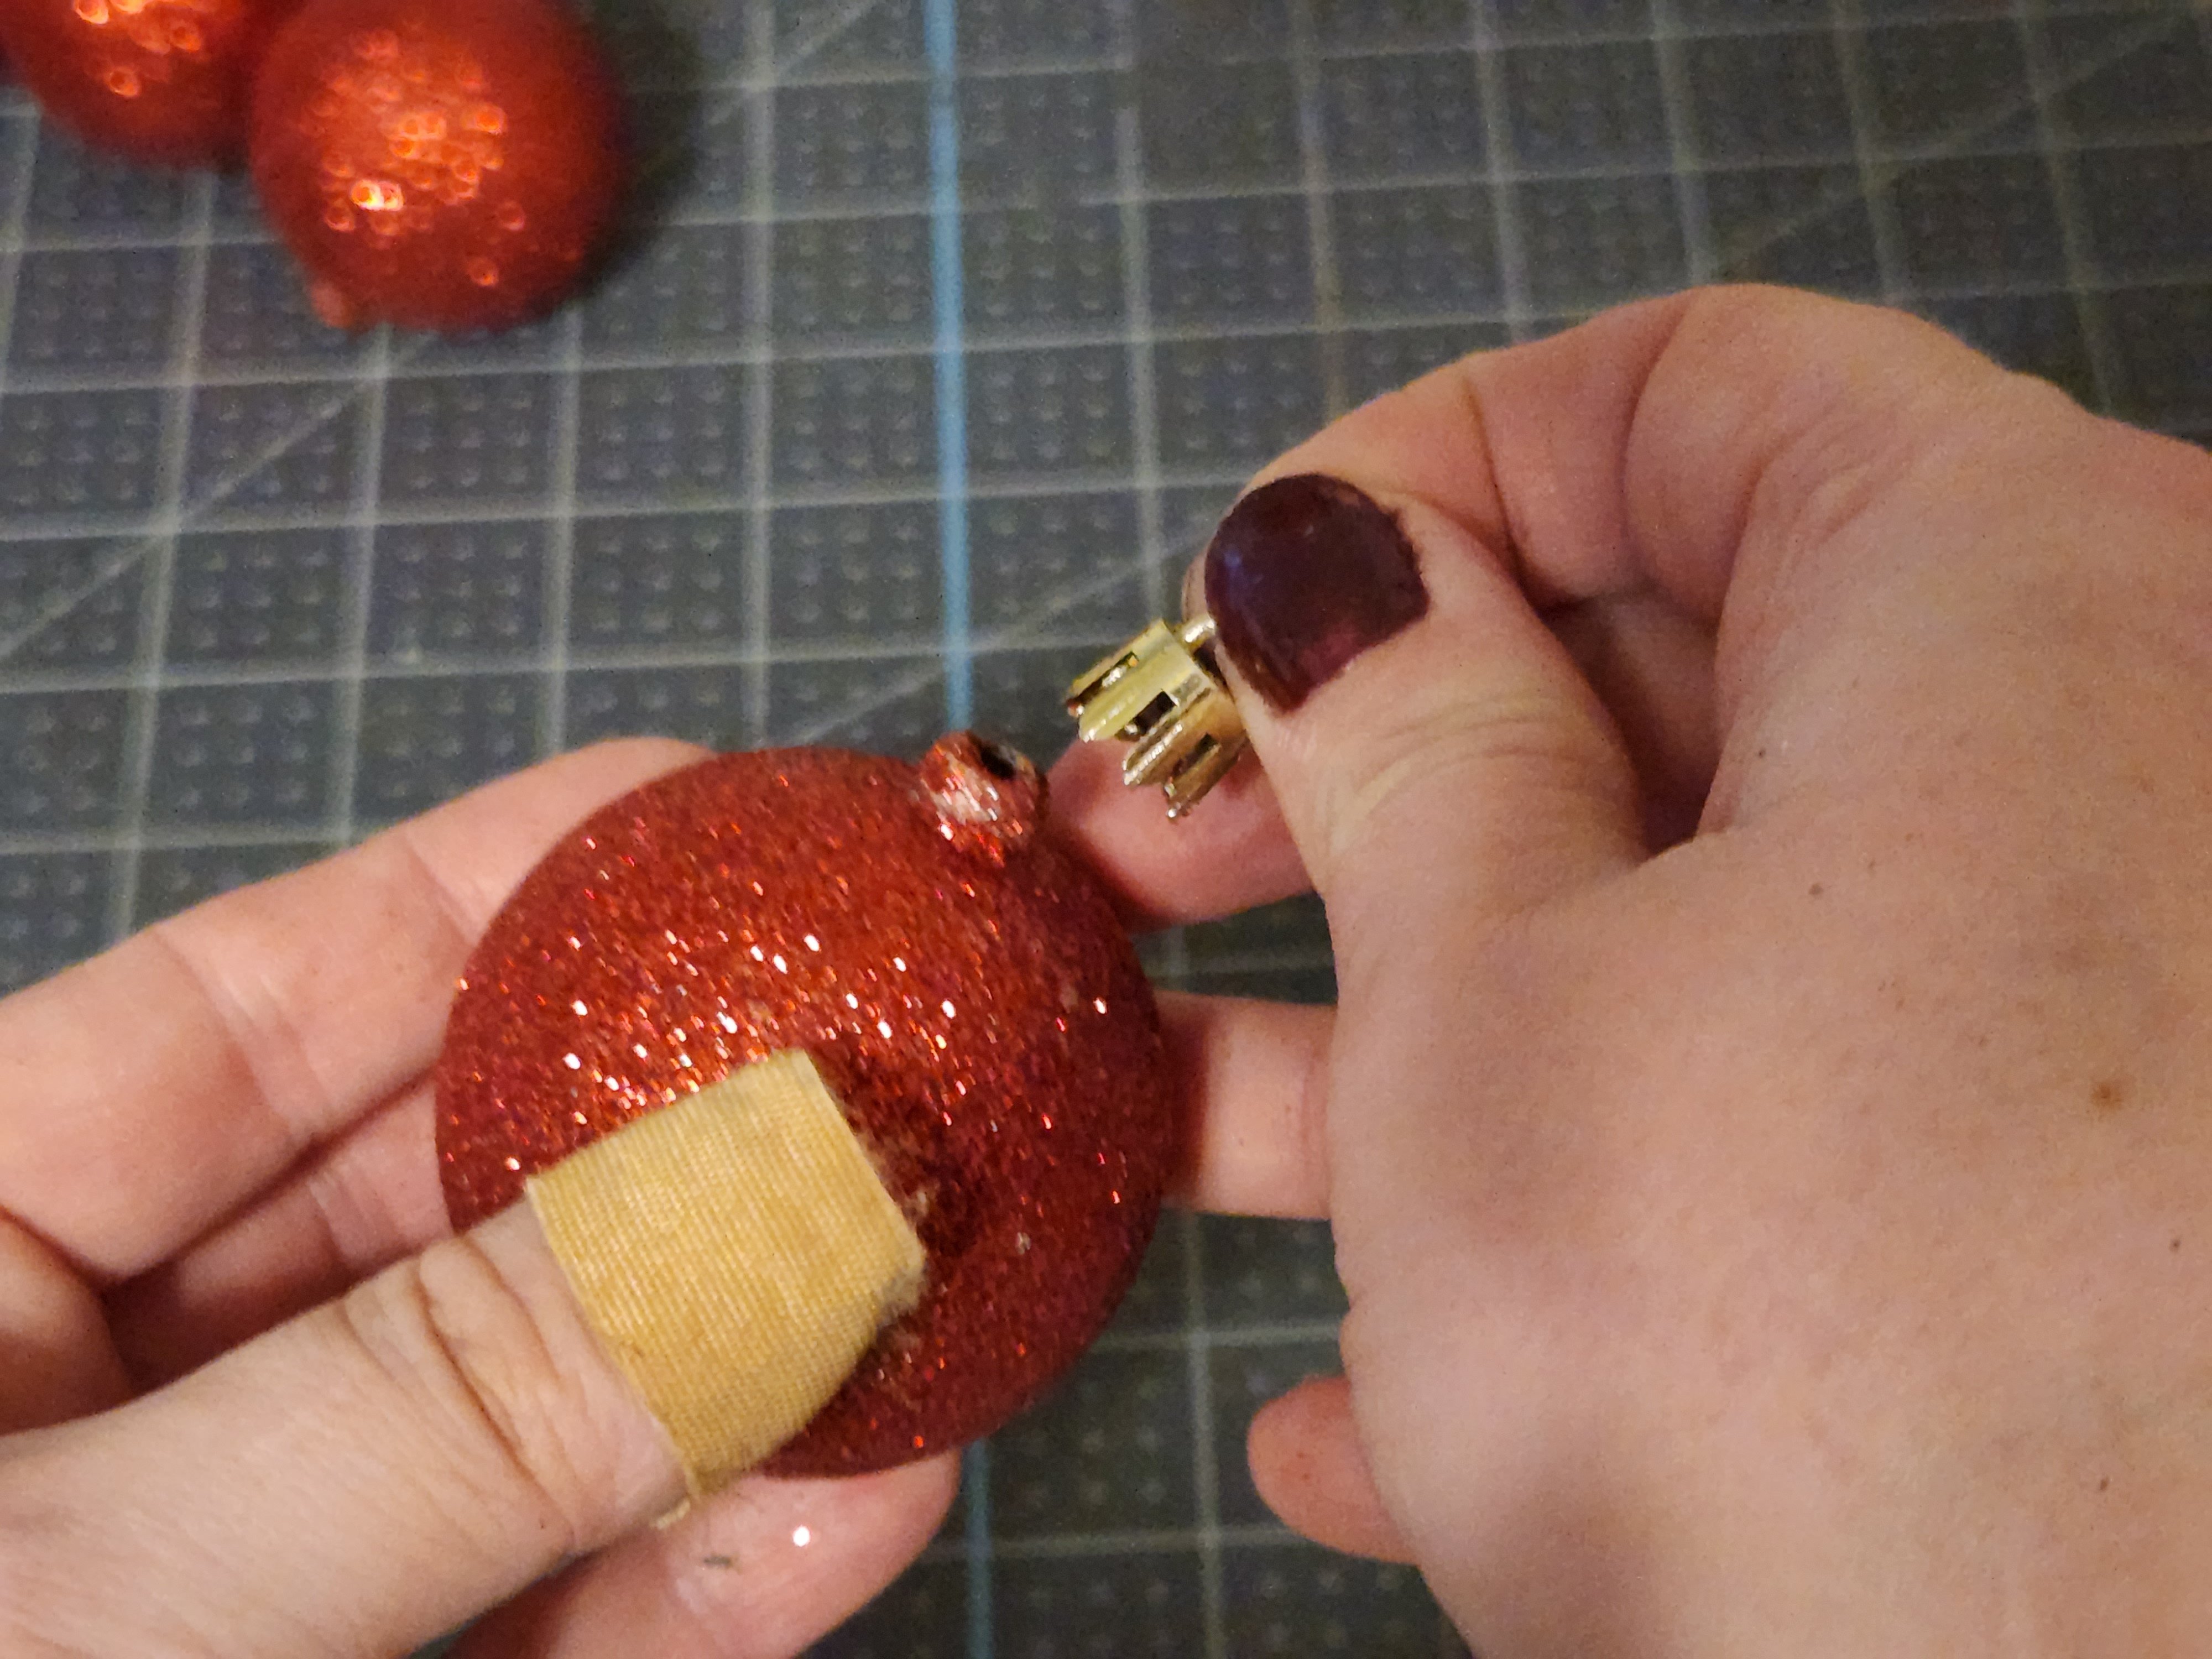 Pulling the gold hanger off of a ball ornament.